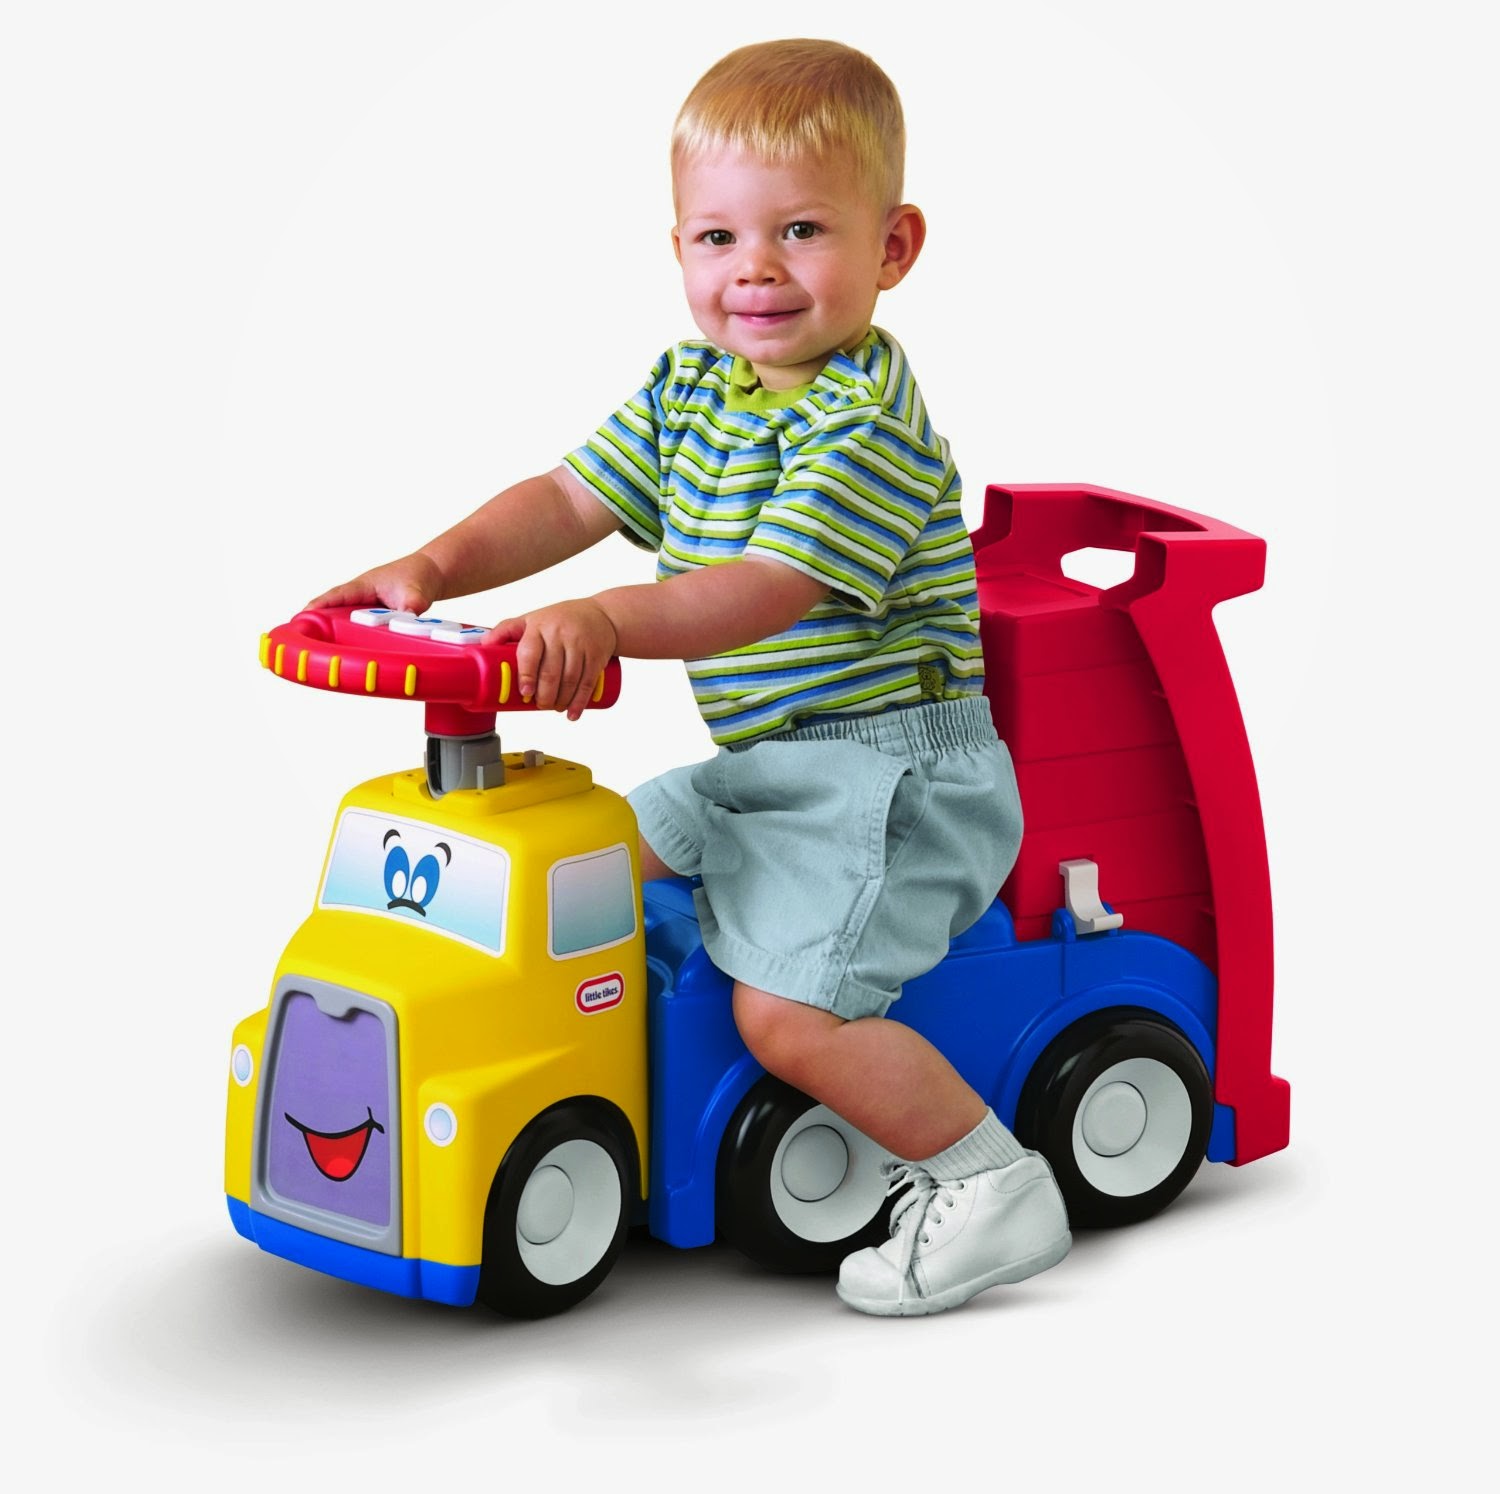 Toddler Approved!: 7 Favorite Ride-On Toys for Toddlers {Toddler